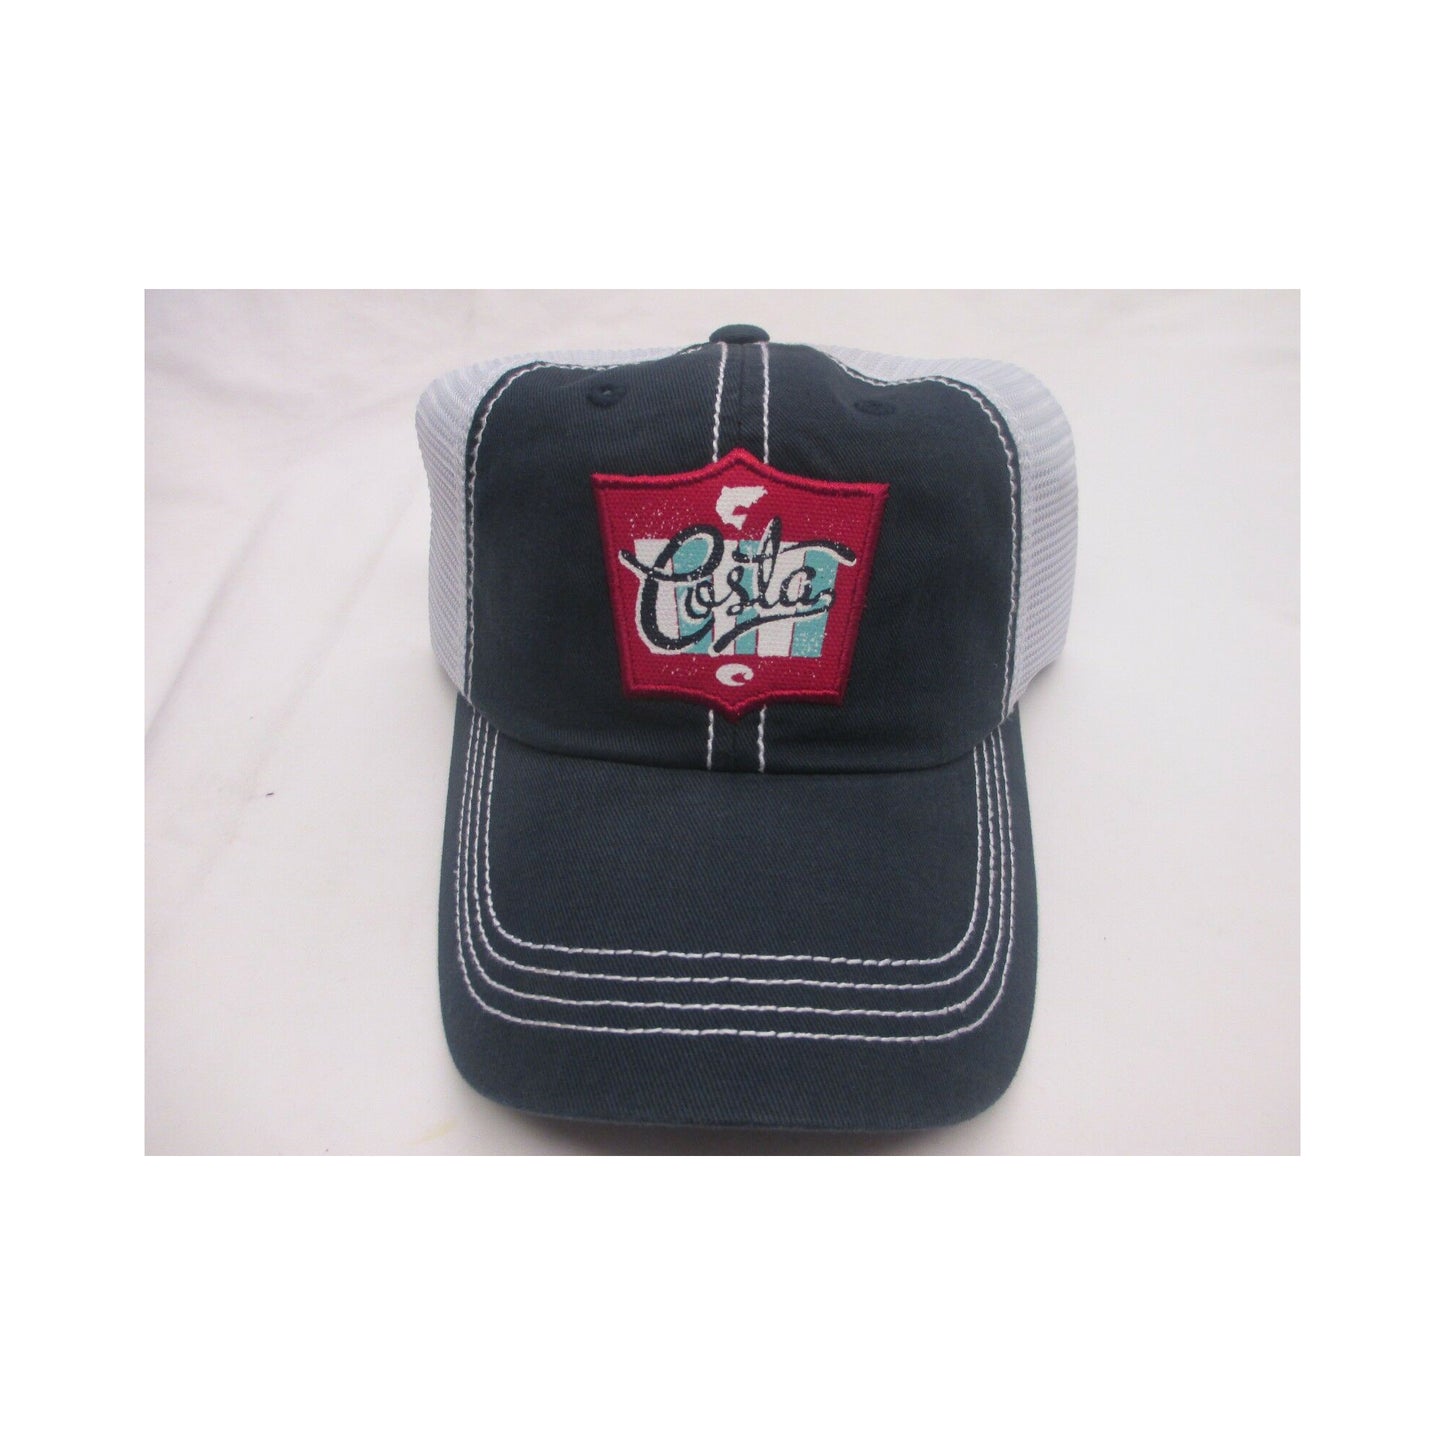 New Authentic Costa Trucker Hat Adjustable Navy with Rodeo Patch Logo White Mesh